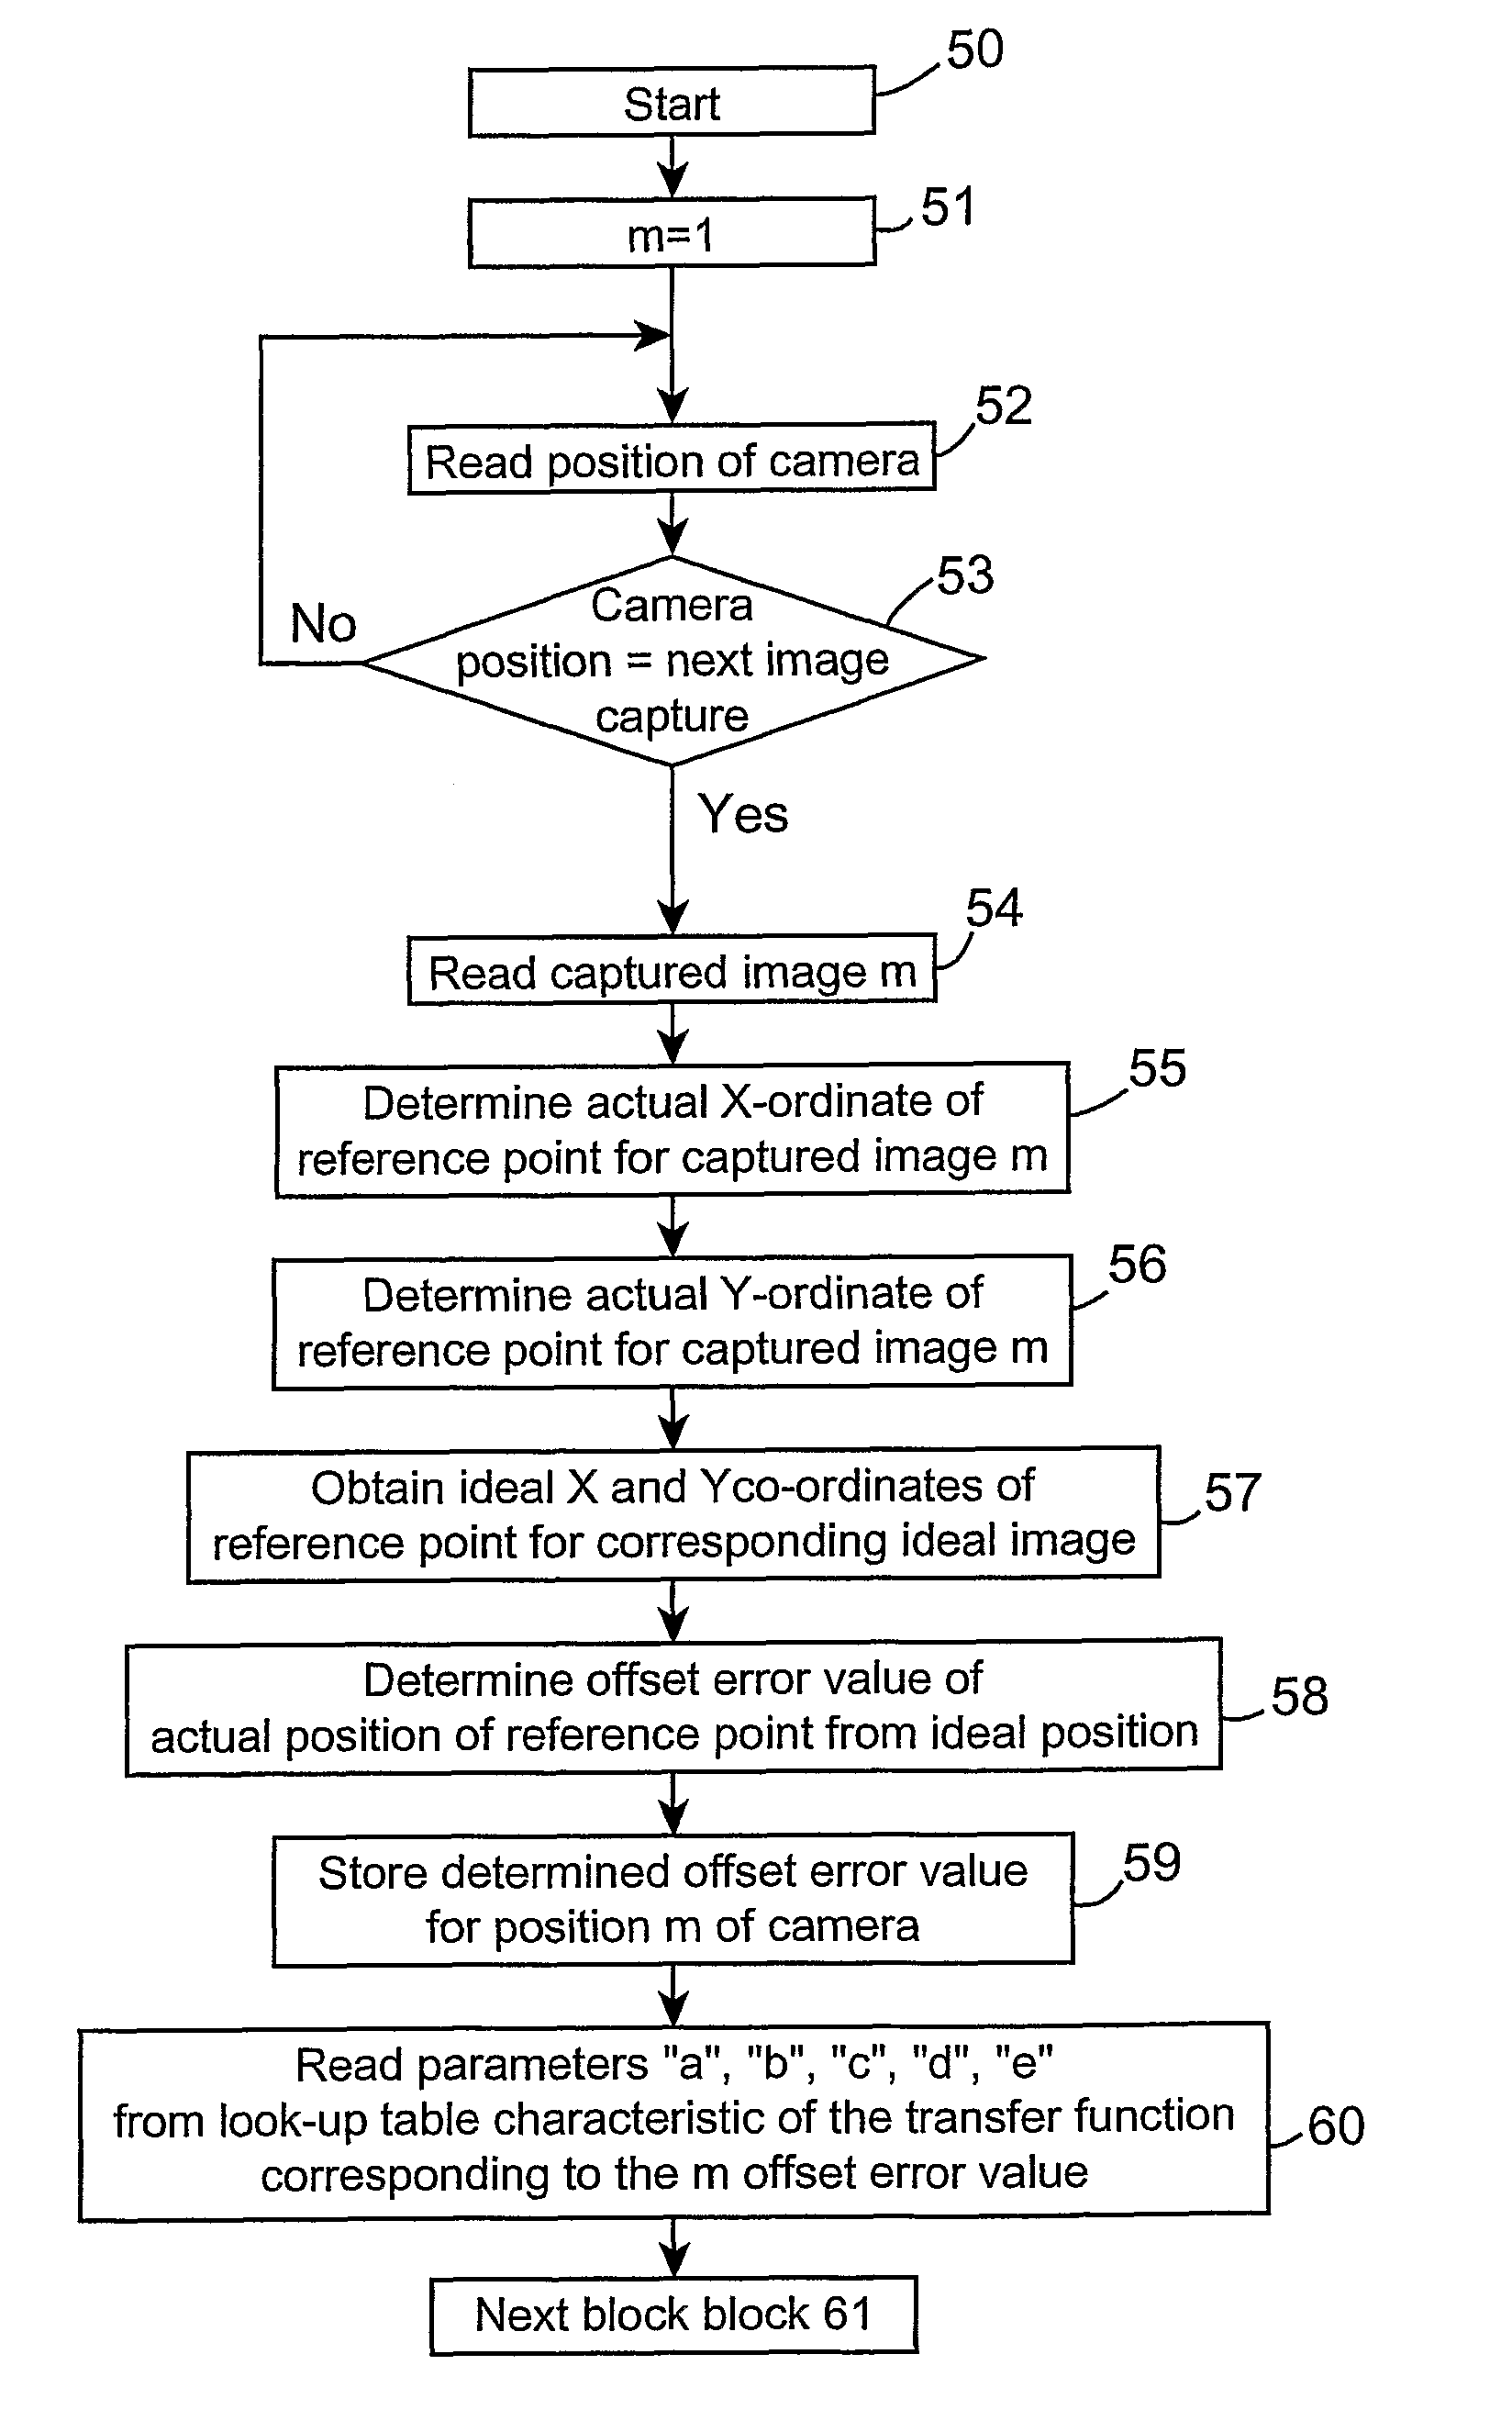 Method and apparatus for calibrating an image capturing device, and a method and apparatus for outputting image frames from sequentially captured image frames with compensation for image capture device offset